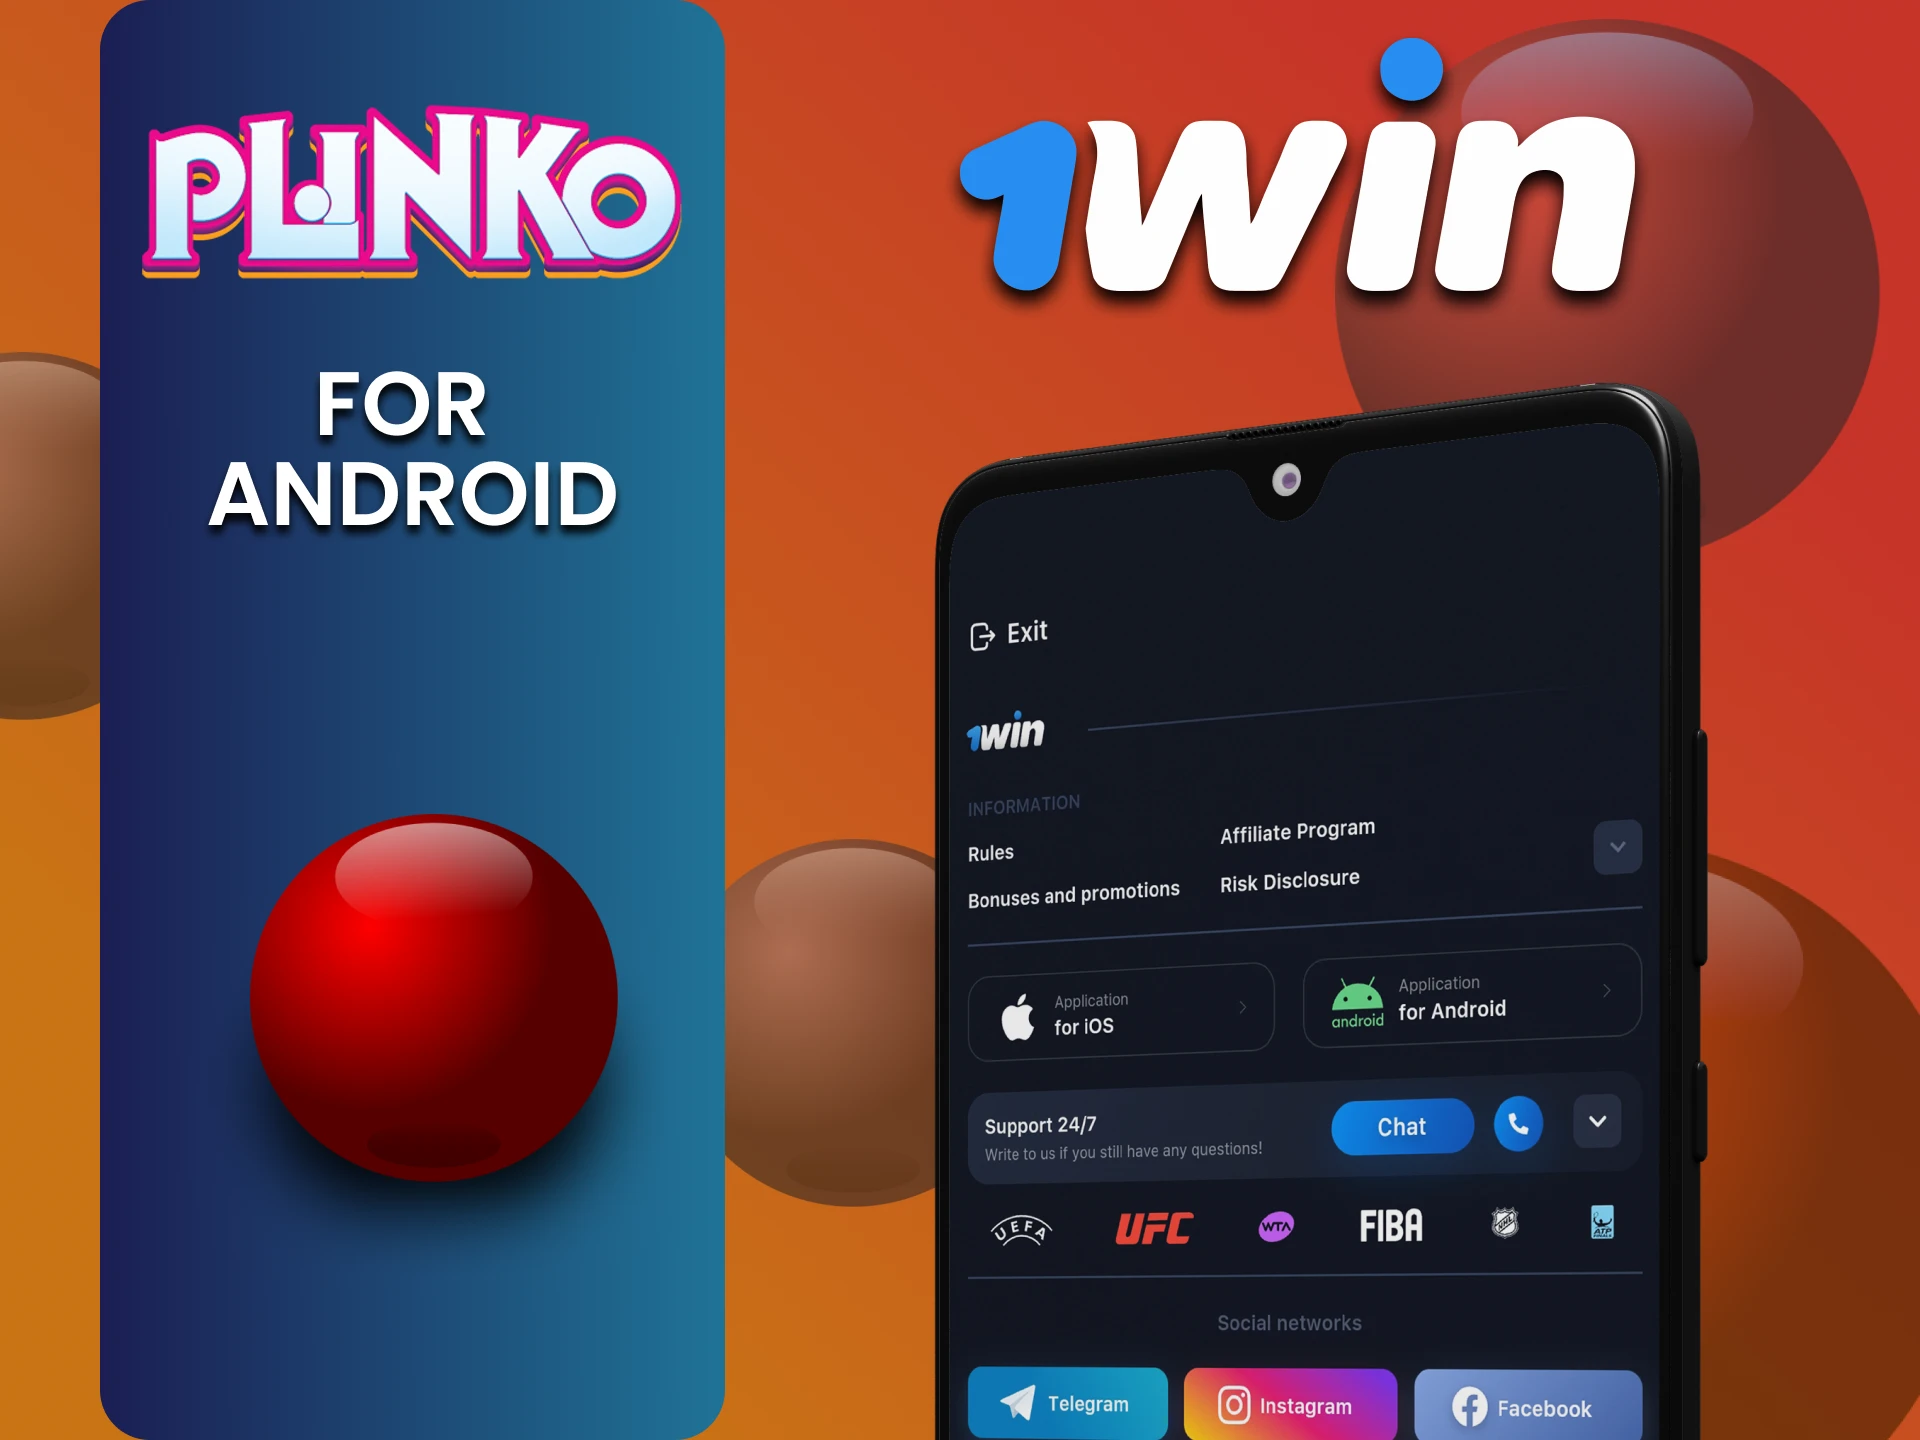 Download the 1win app on Android to play Plinko.